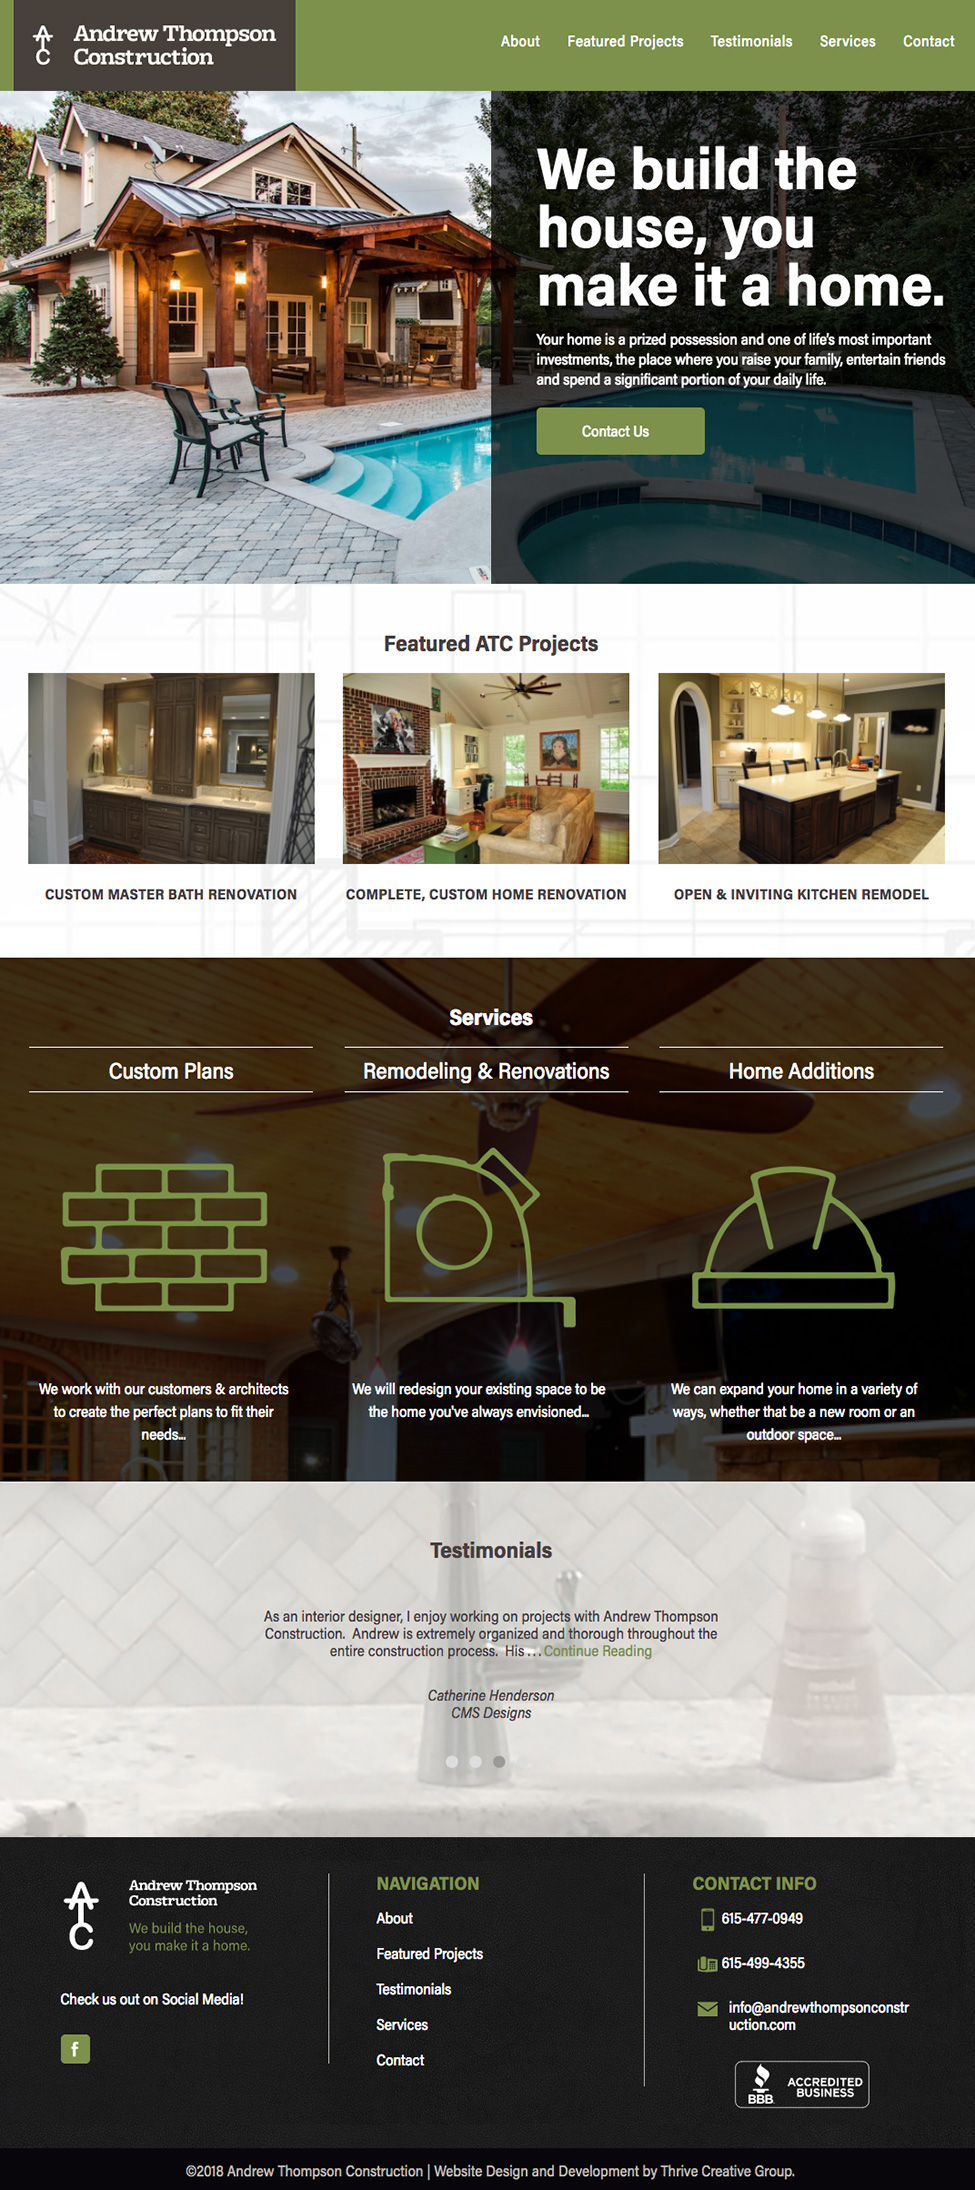 Andrew Thompson Construction Website Home Page